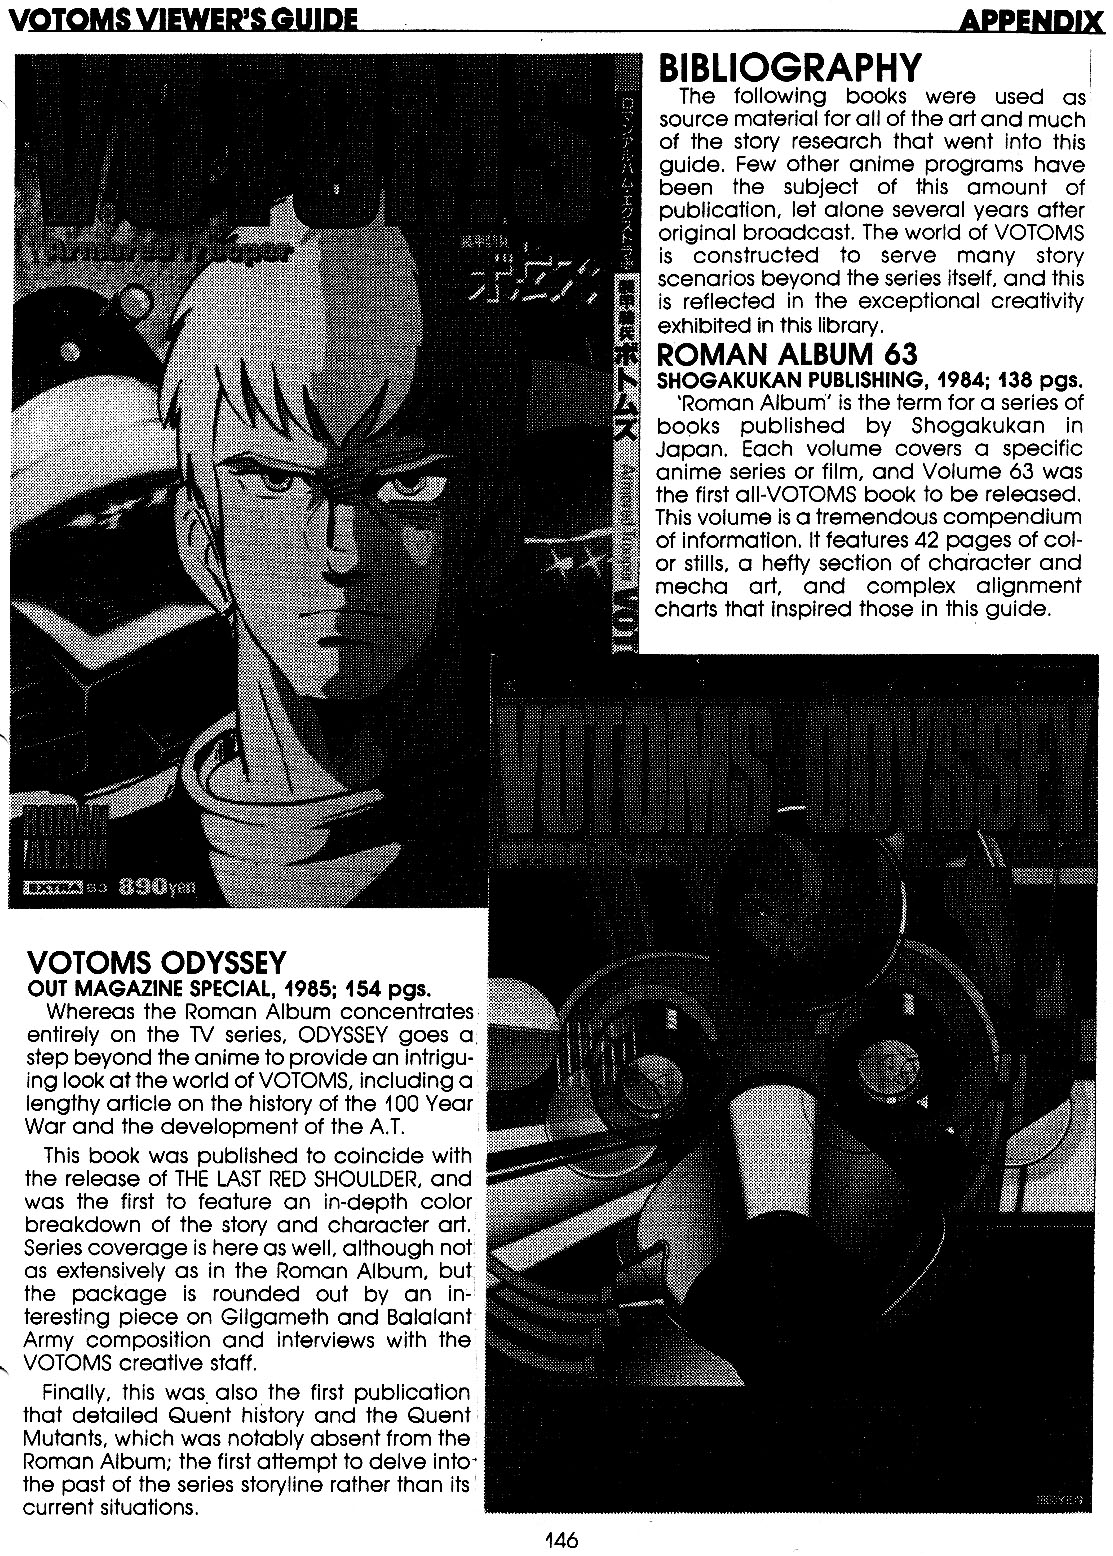 VOTOMS Viewing Guide 146